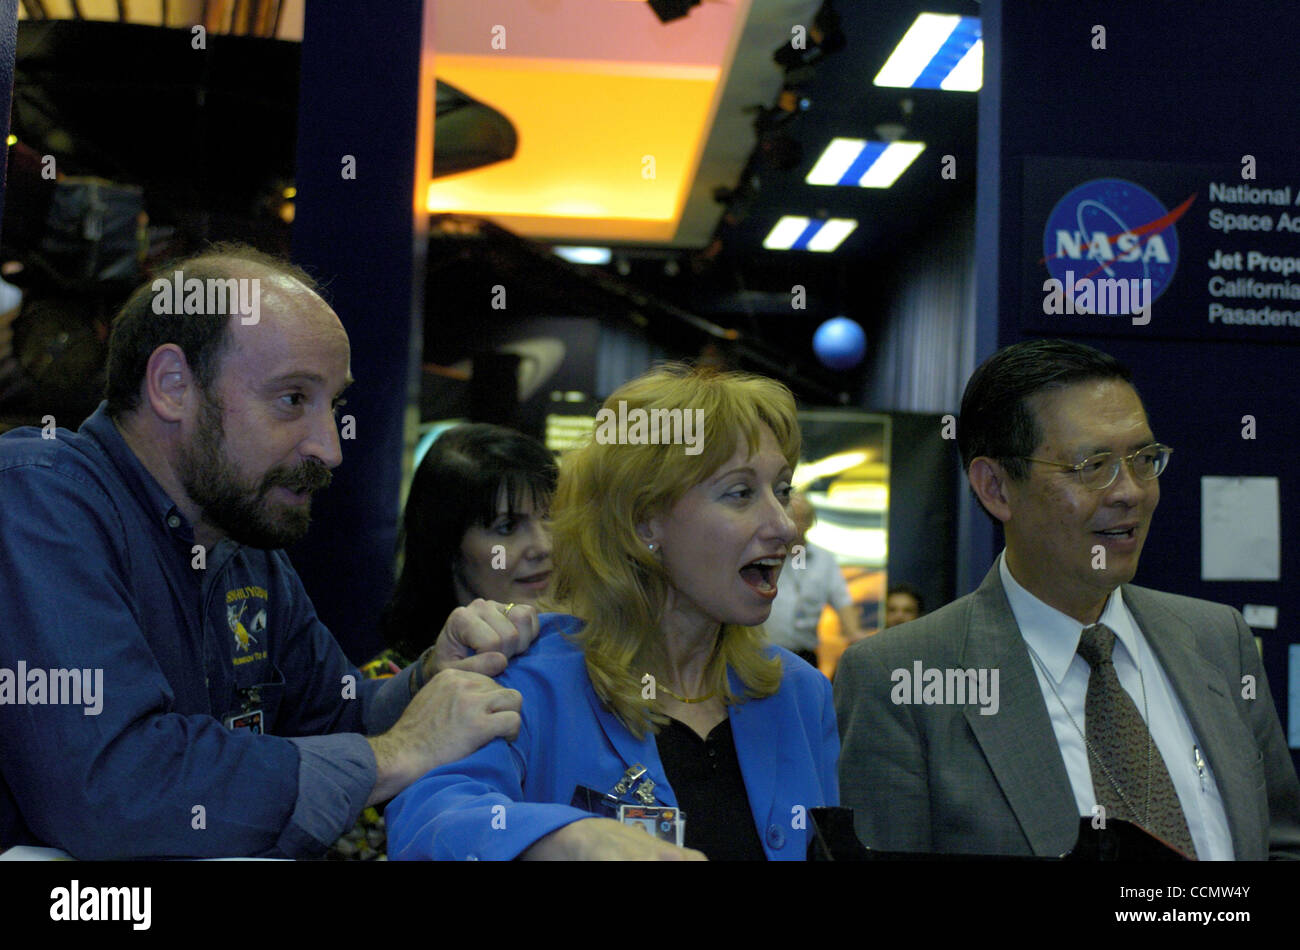 (L-R) Dr. Randii R. Wesson (Navigator Program Engineer), Dr. Rosaly M.C. Lopes (research scientist), and Dr. Peter T. Poon (telecommunications & system mgr.) all watch in anticipation of Cassini's successful navigation at 53,000 mph pthrough the rings of Saturn. 6/30/04, Pasadena, Ca, Rob DeLorenzo Stock Photo